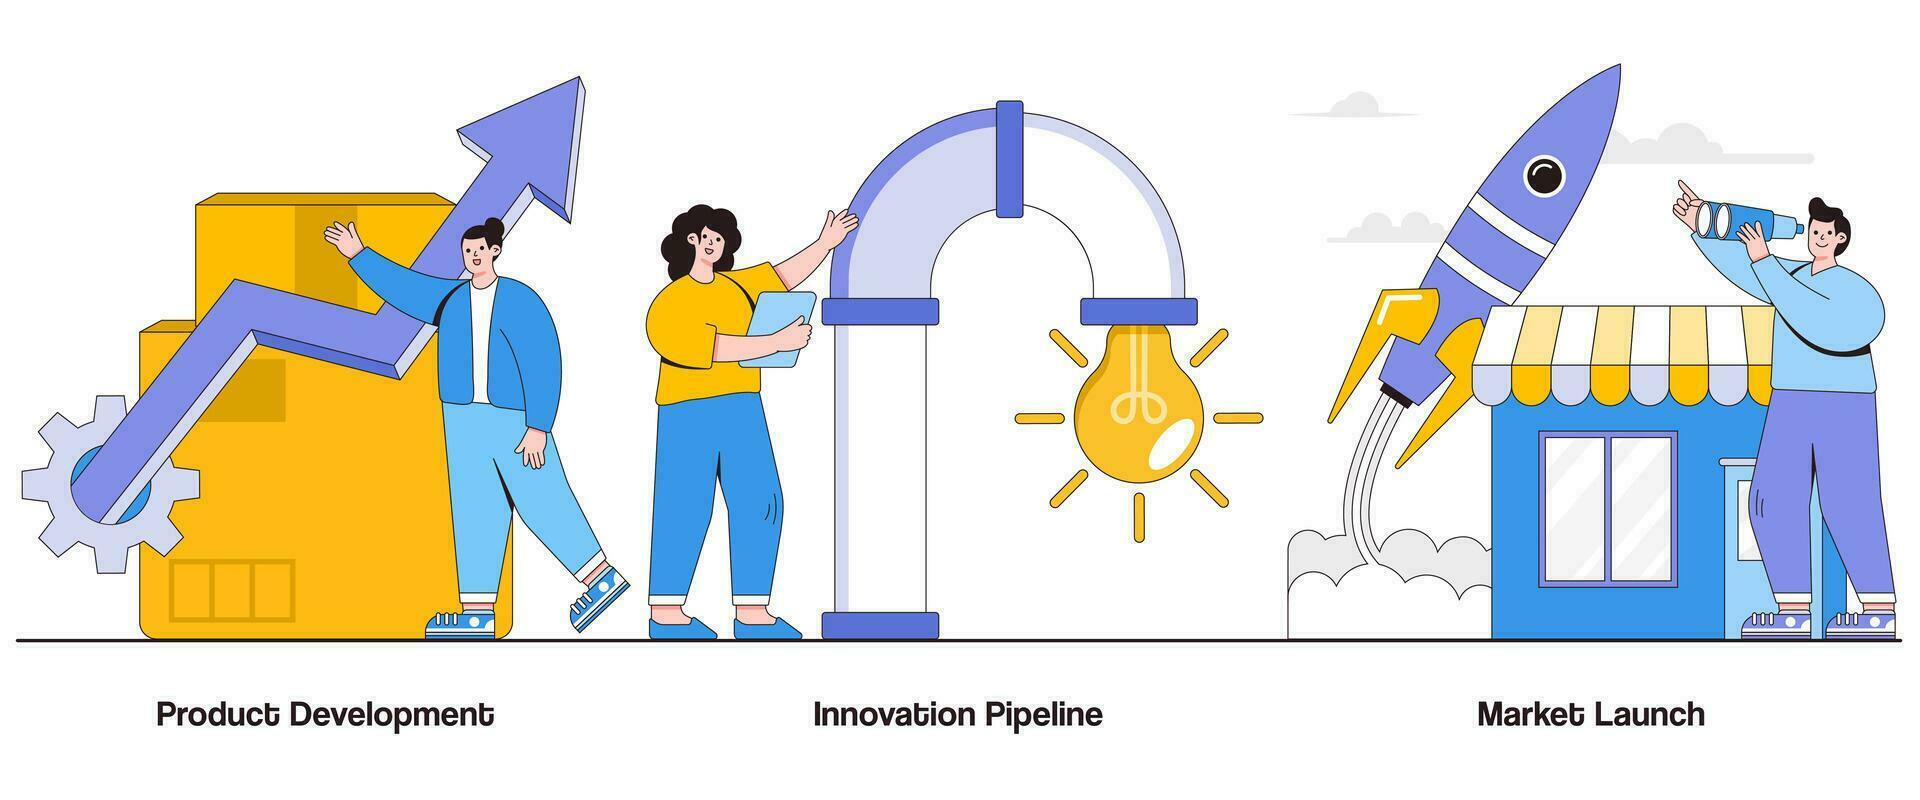 Product Development, Innovation Pipeline, Market Launch Concept with Character. Product Innovation Abstract Vector Illustration Set. Ideation, Prototyping, Market Disruption Metaphor